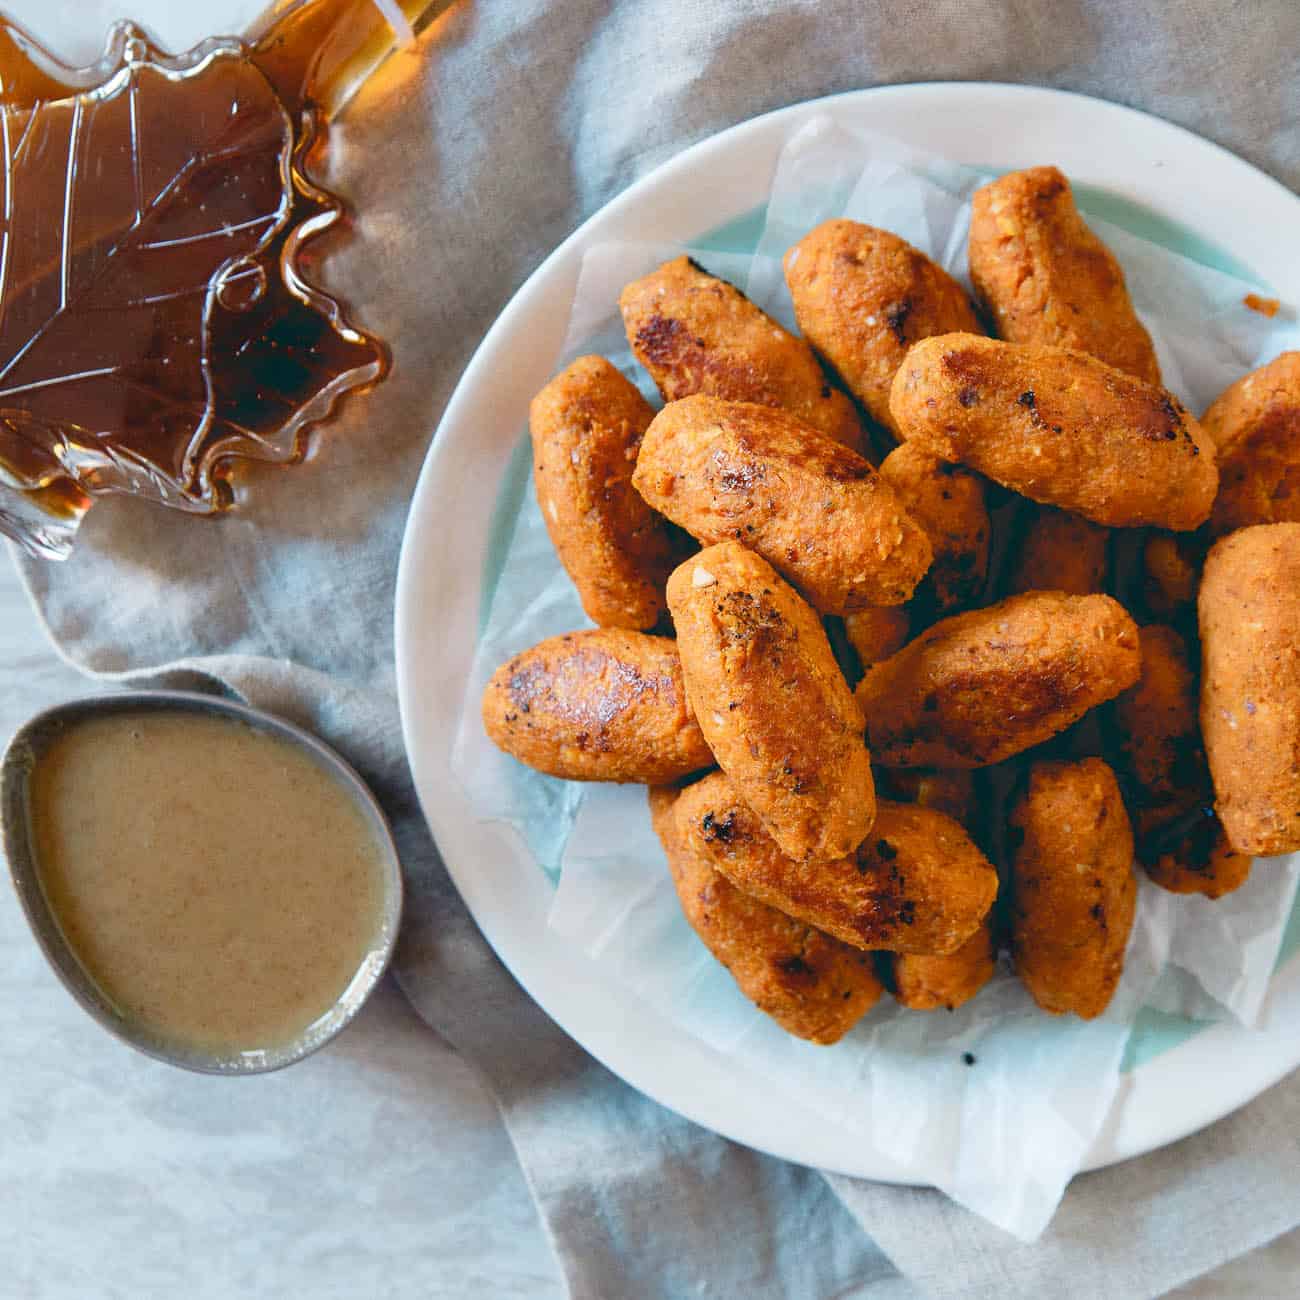 These baked sweet potato tots are infused with real maple syrup for a deep fall flavor and served with a dijon maple dipping sauce.